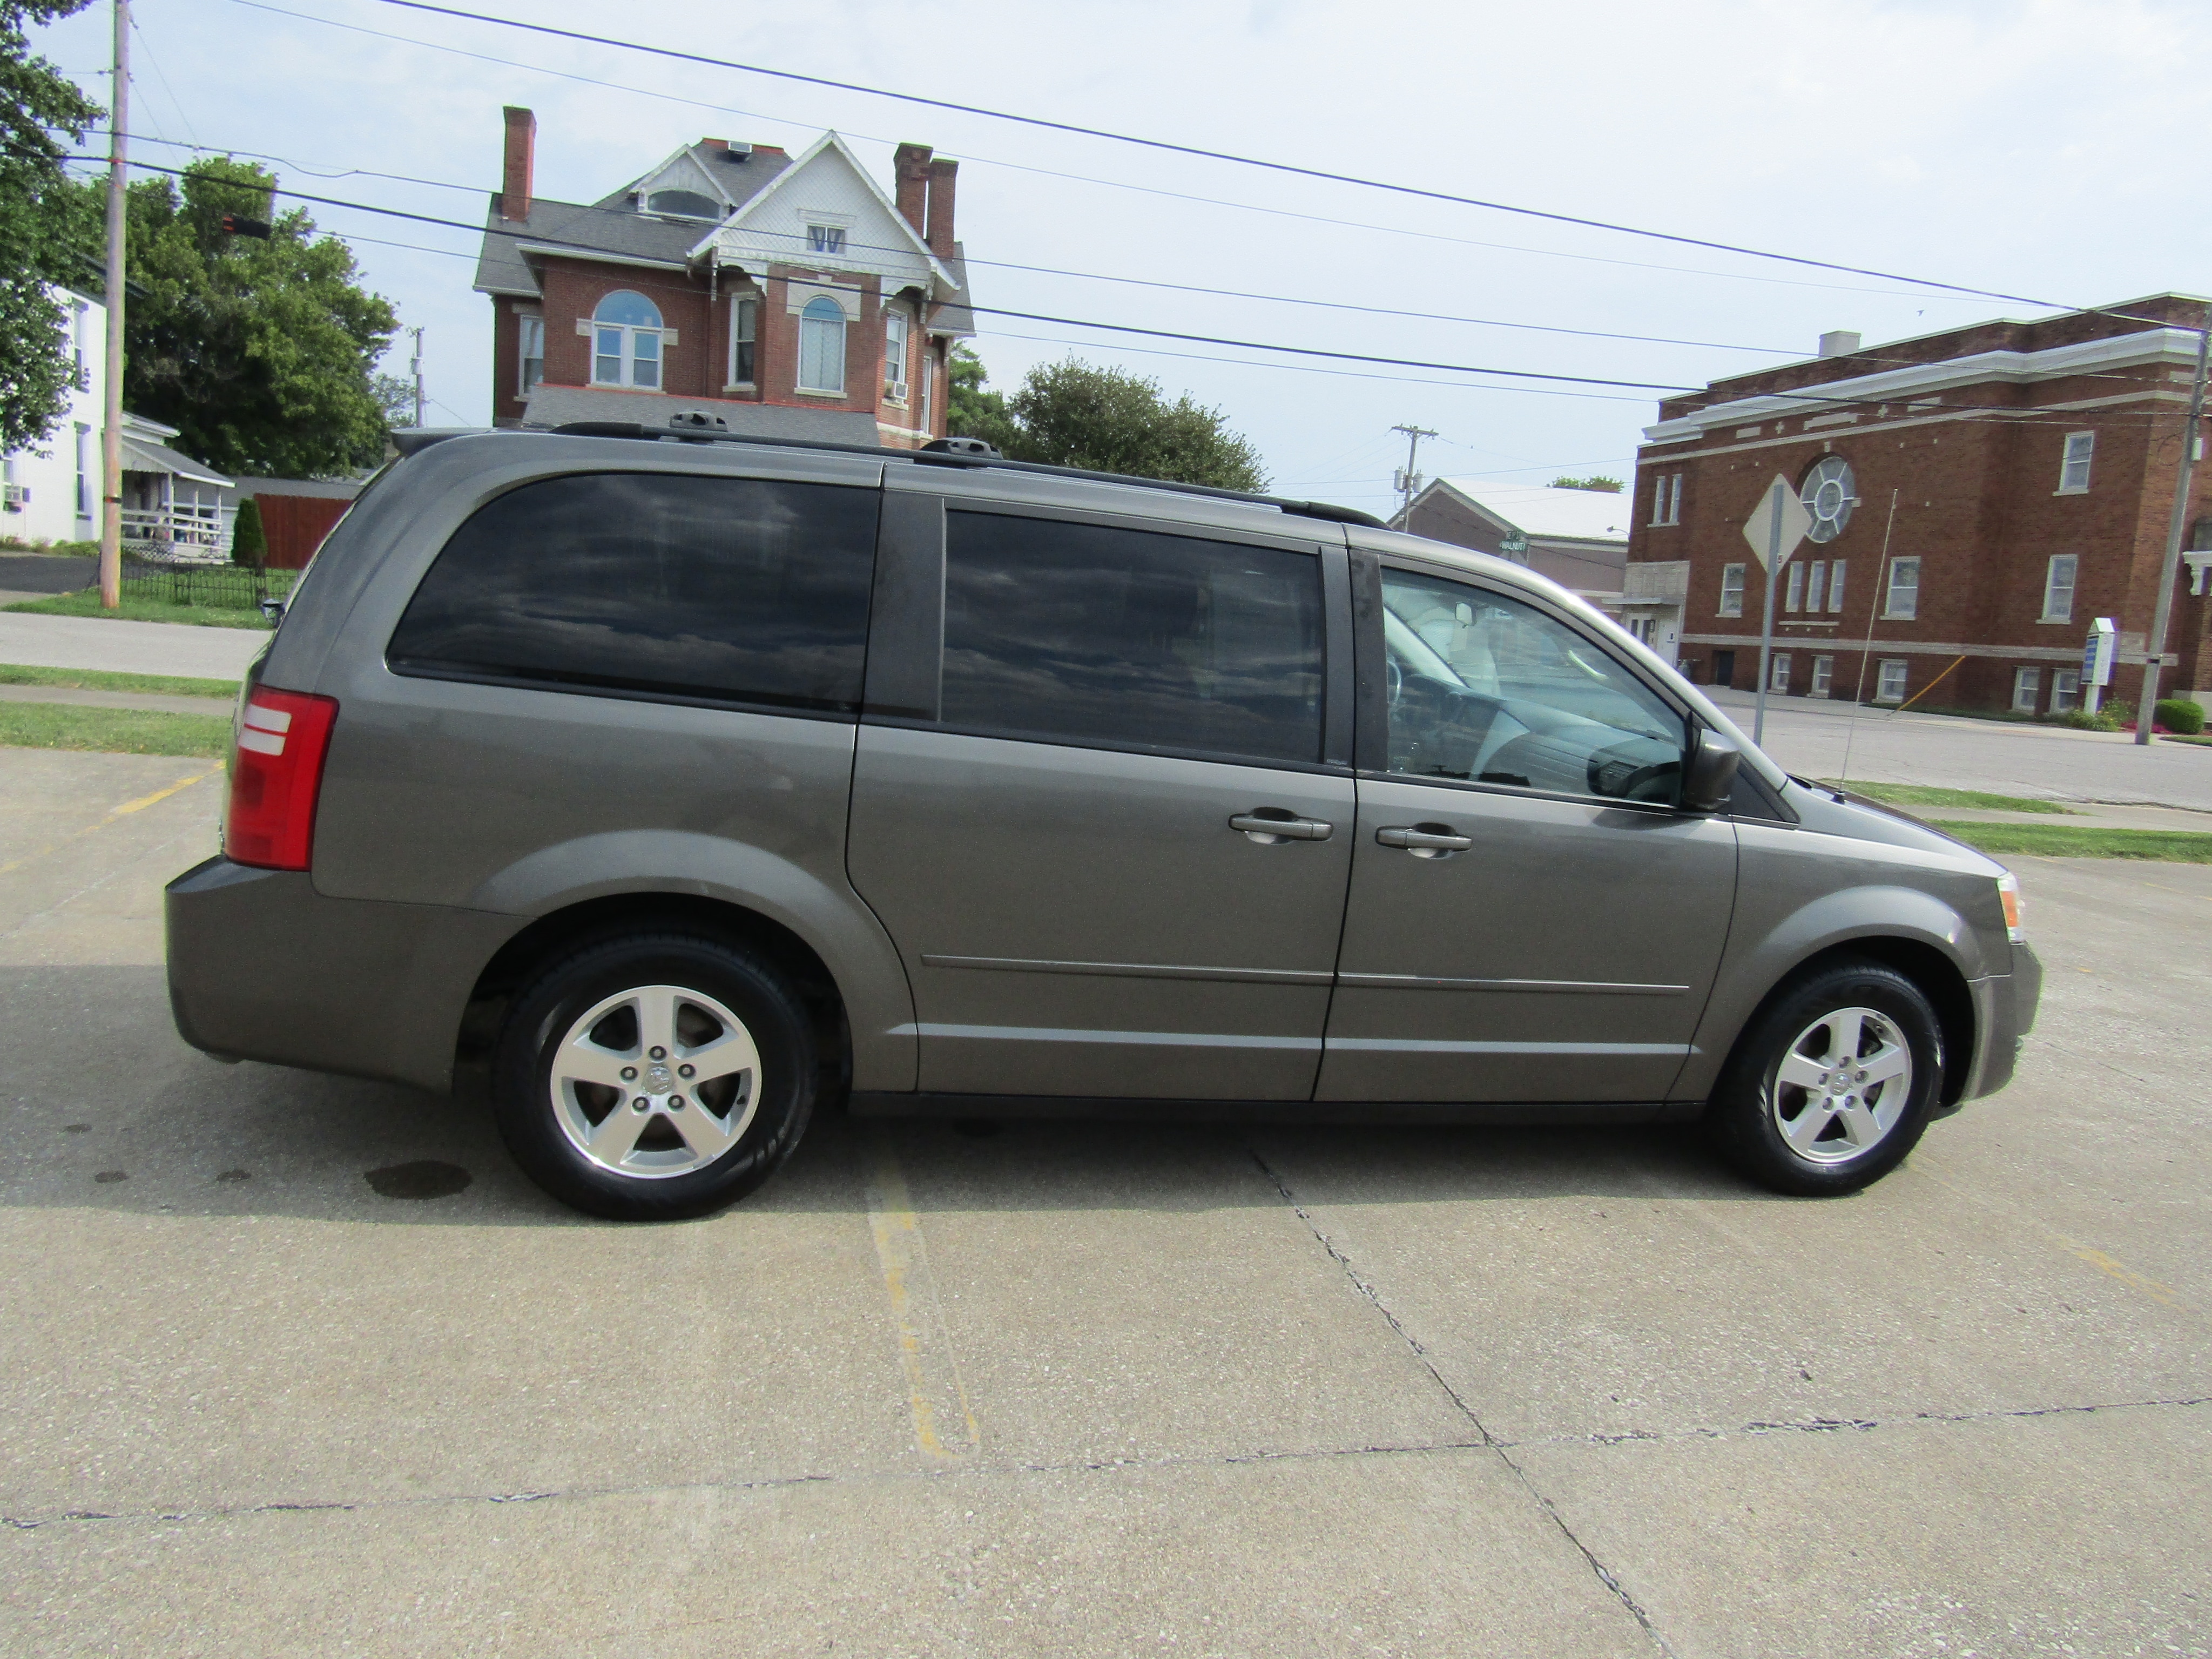 Used 2010 Dodge Grand Caravan Hero with VIN 2D4RN3D12AR401556 for sale in Washington, IN